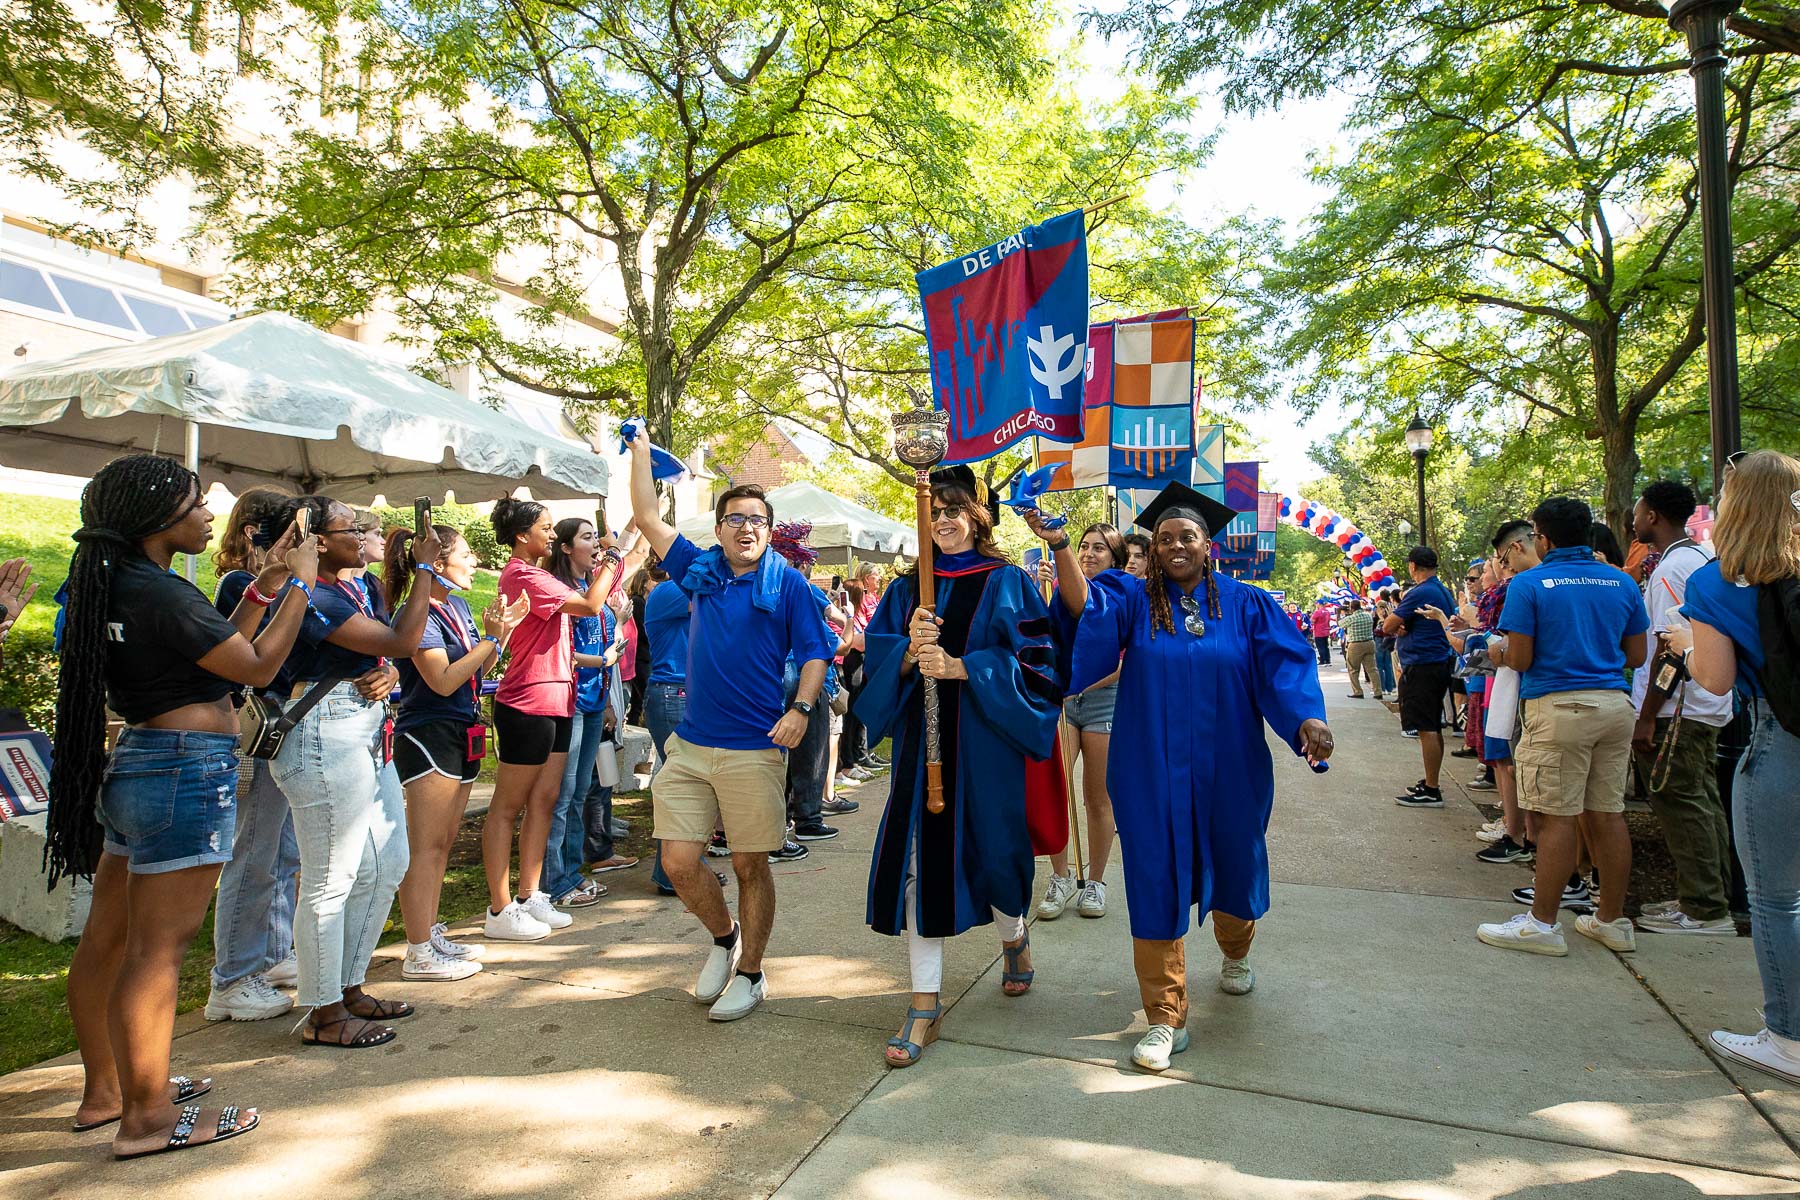 Left to right, Kevin Holechko, SGA president, Sonia Soltero, Faculty Council president, and Dani Blackwell, Staff Council vice president, carry the university mace into the Quad during the new student cavalcade. (DePaul University/Jeff Carrion)